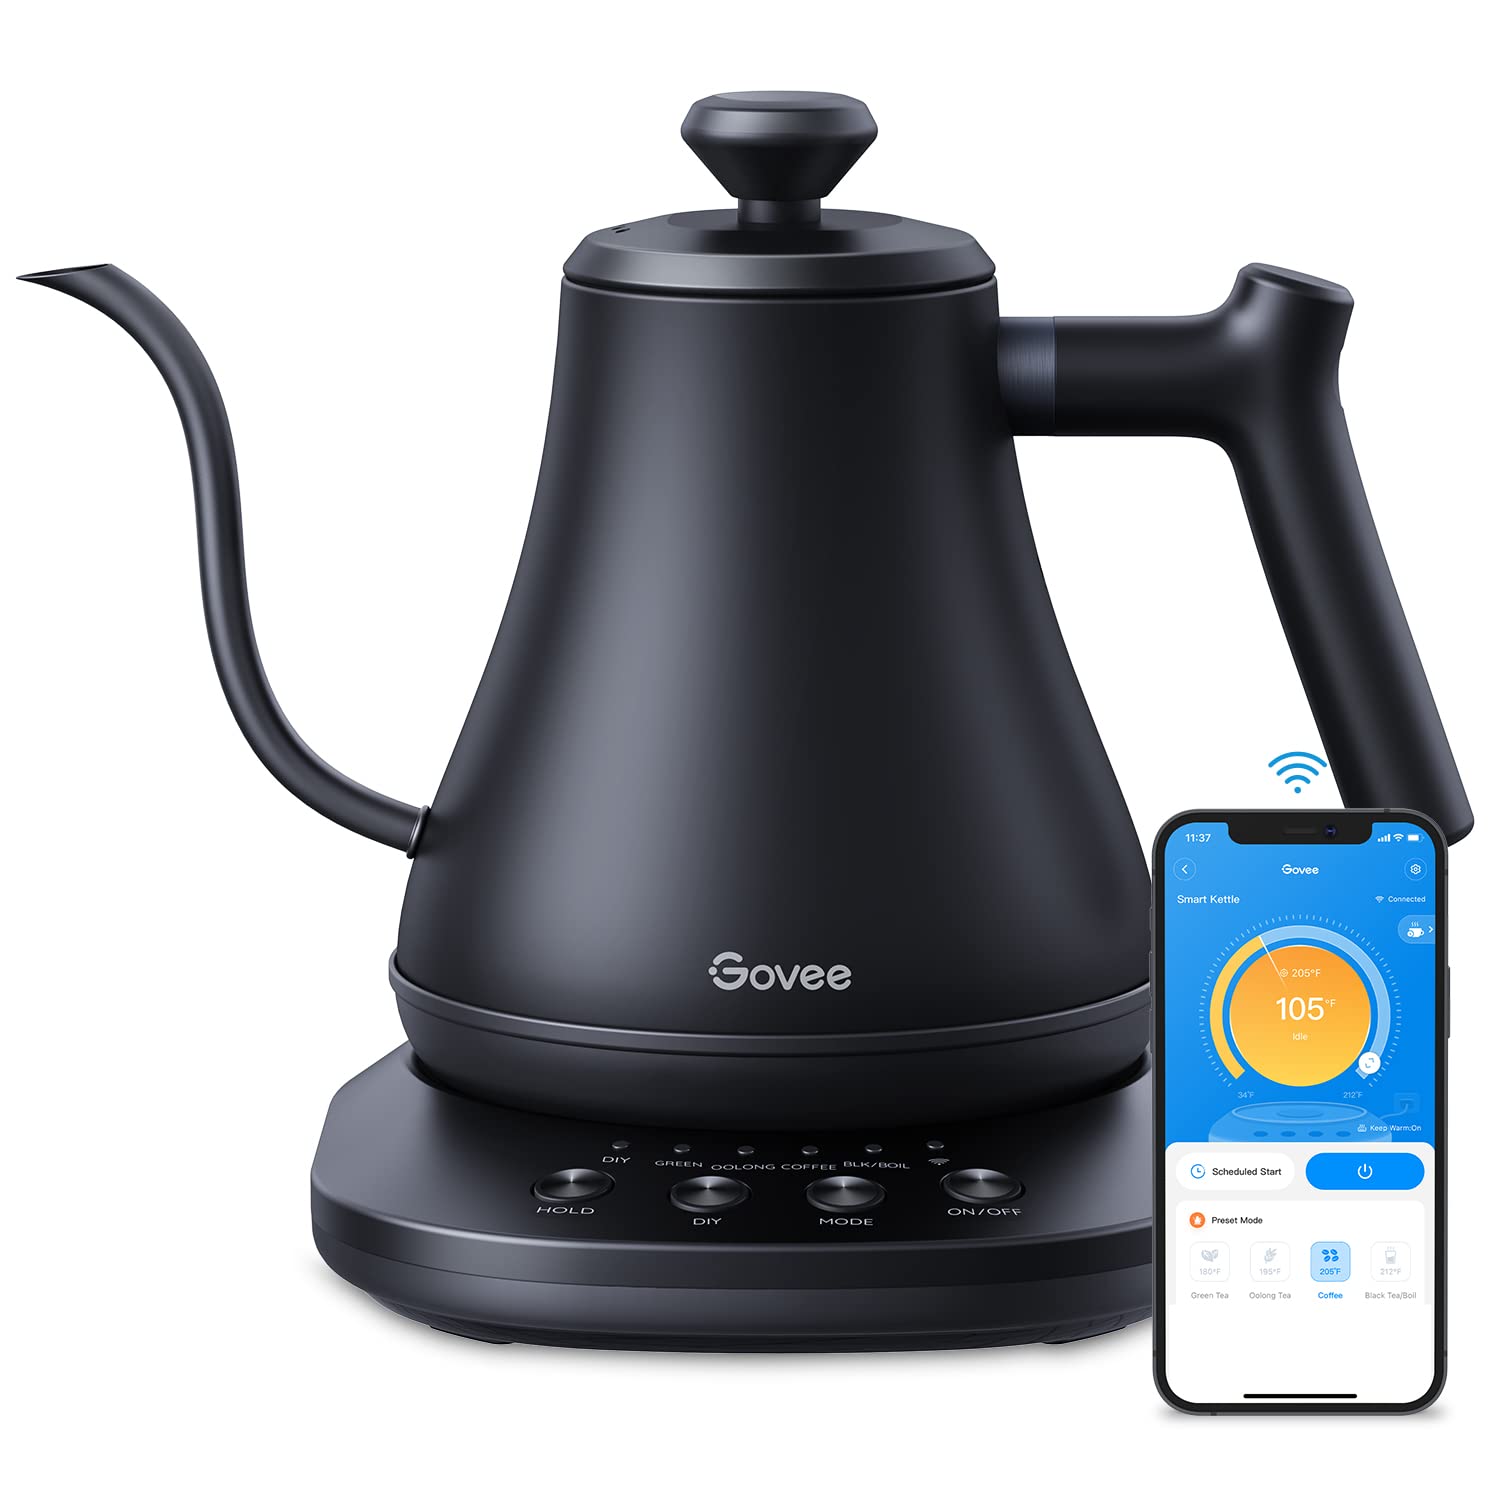 Govee Smart Electric Kettle, WiFi Variable Temperature Gooseneck Pour Over Kettle and Tea Kettle, Alexa Control, 1200W Quick Heating, 100% Stainless Steel, 0.8L, Matte Black